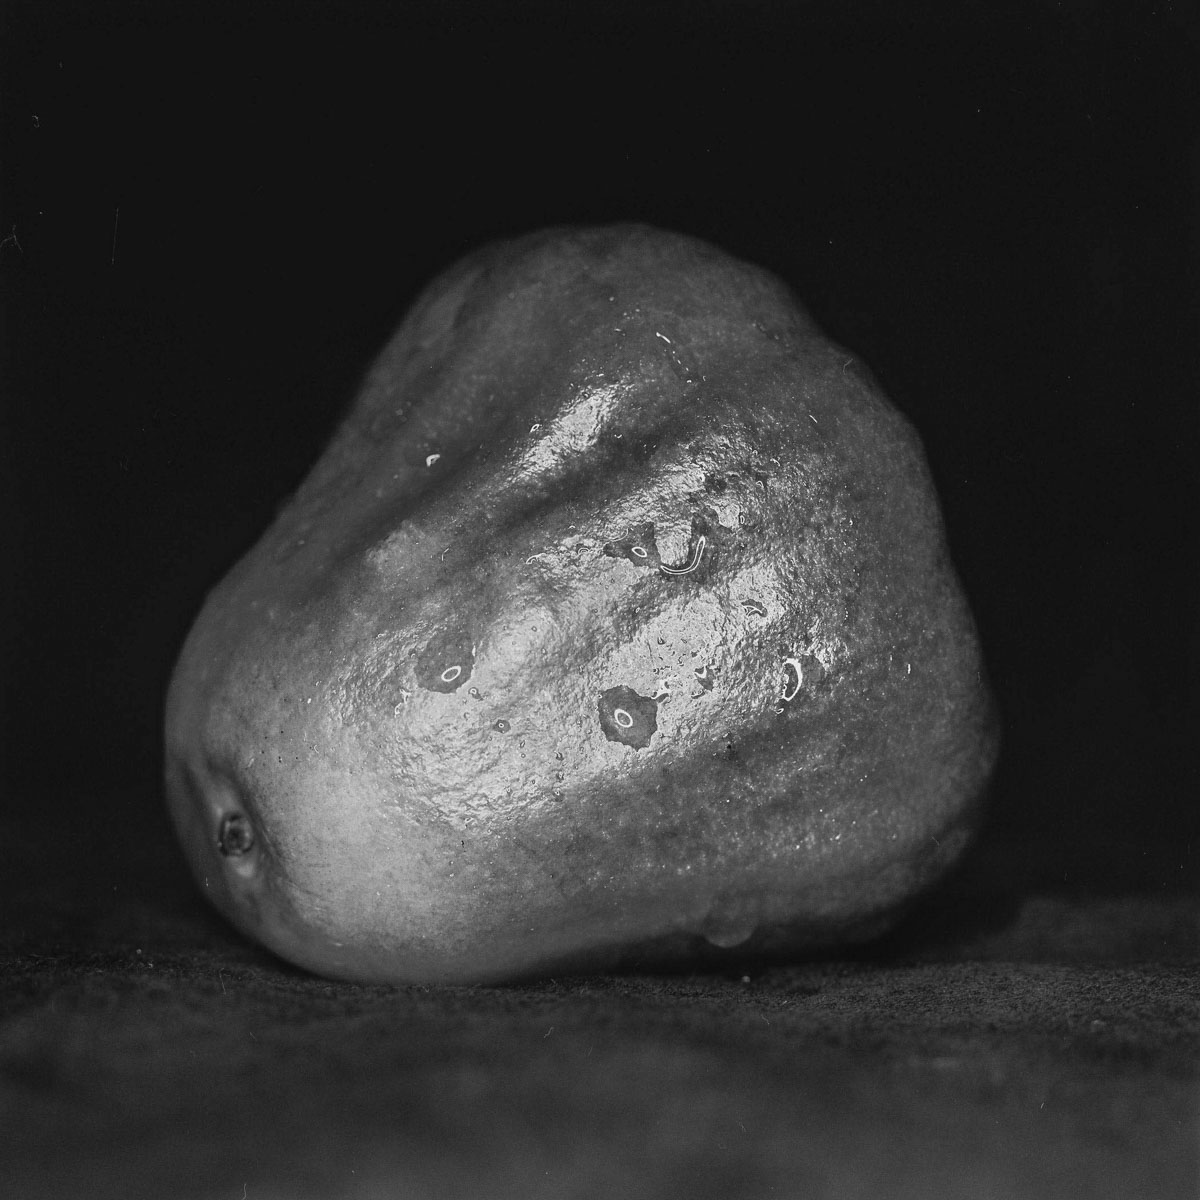 Wax apple study #02 - Ilford Pan F Plus shot at EI 50. Black and white negative film in 120 format shot as 6x6. 32E extension tube.